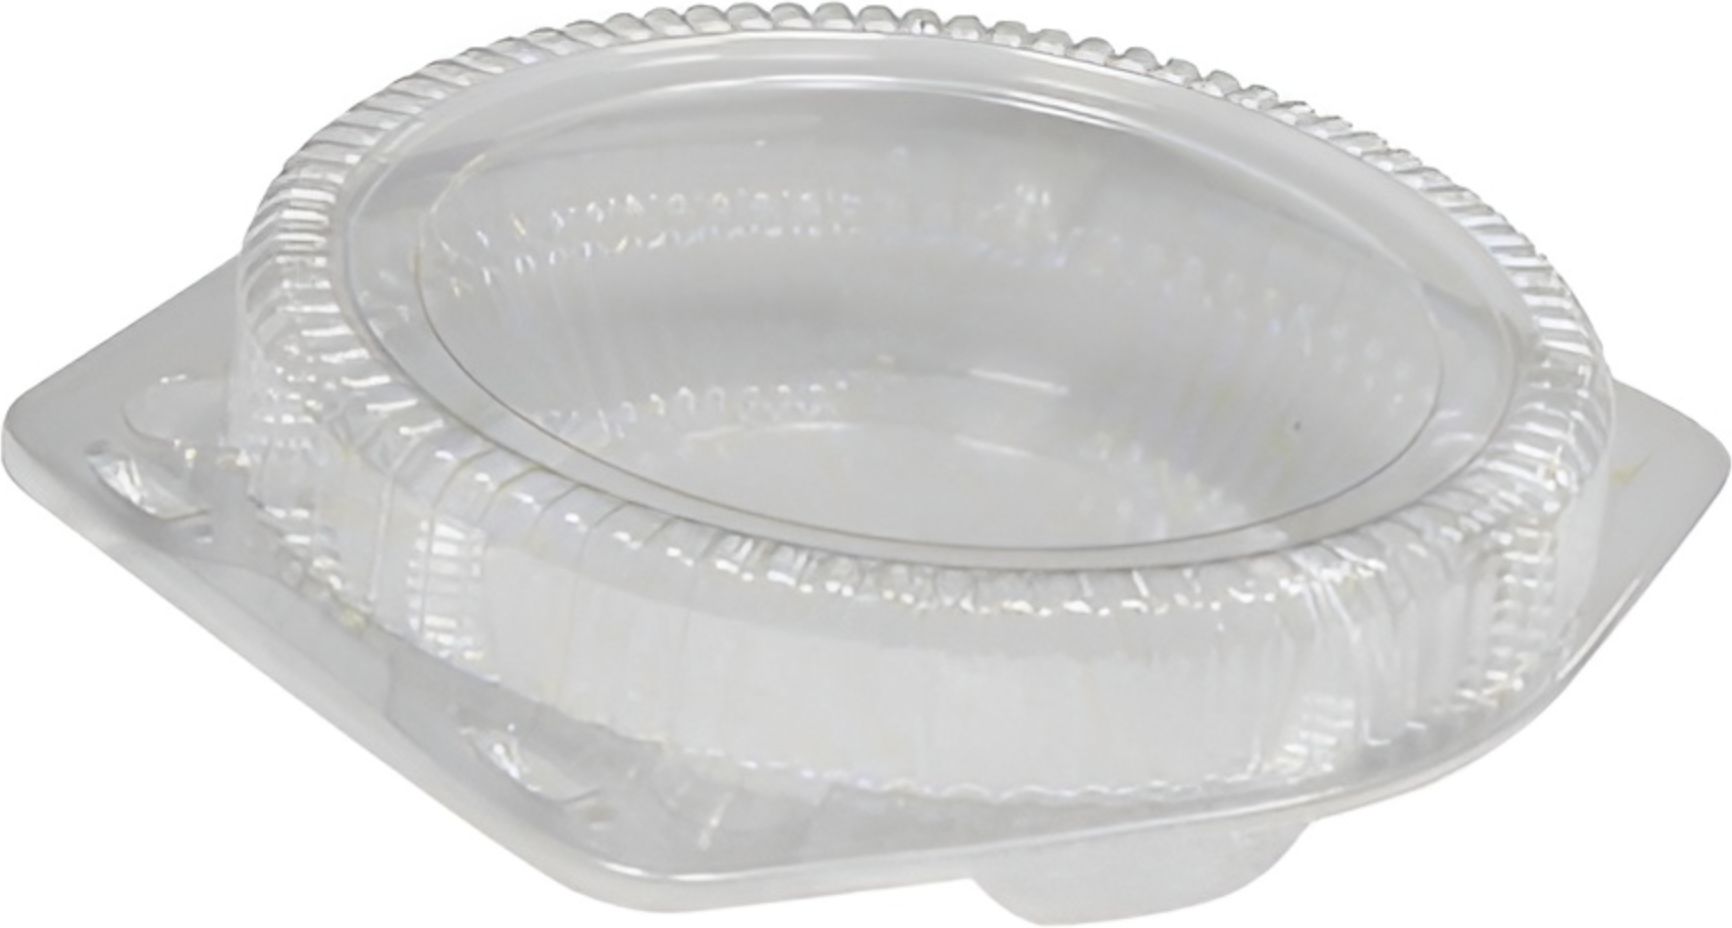 Detroit Forming - 10" Shallow Pie Plastic Hinged Container, 100/Cs - LBH-111